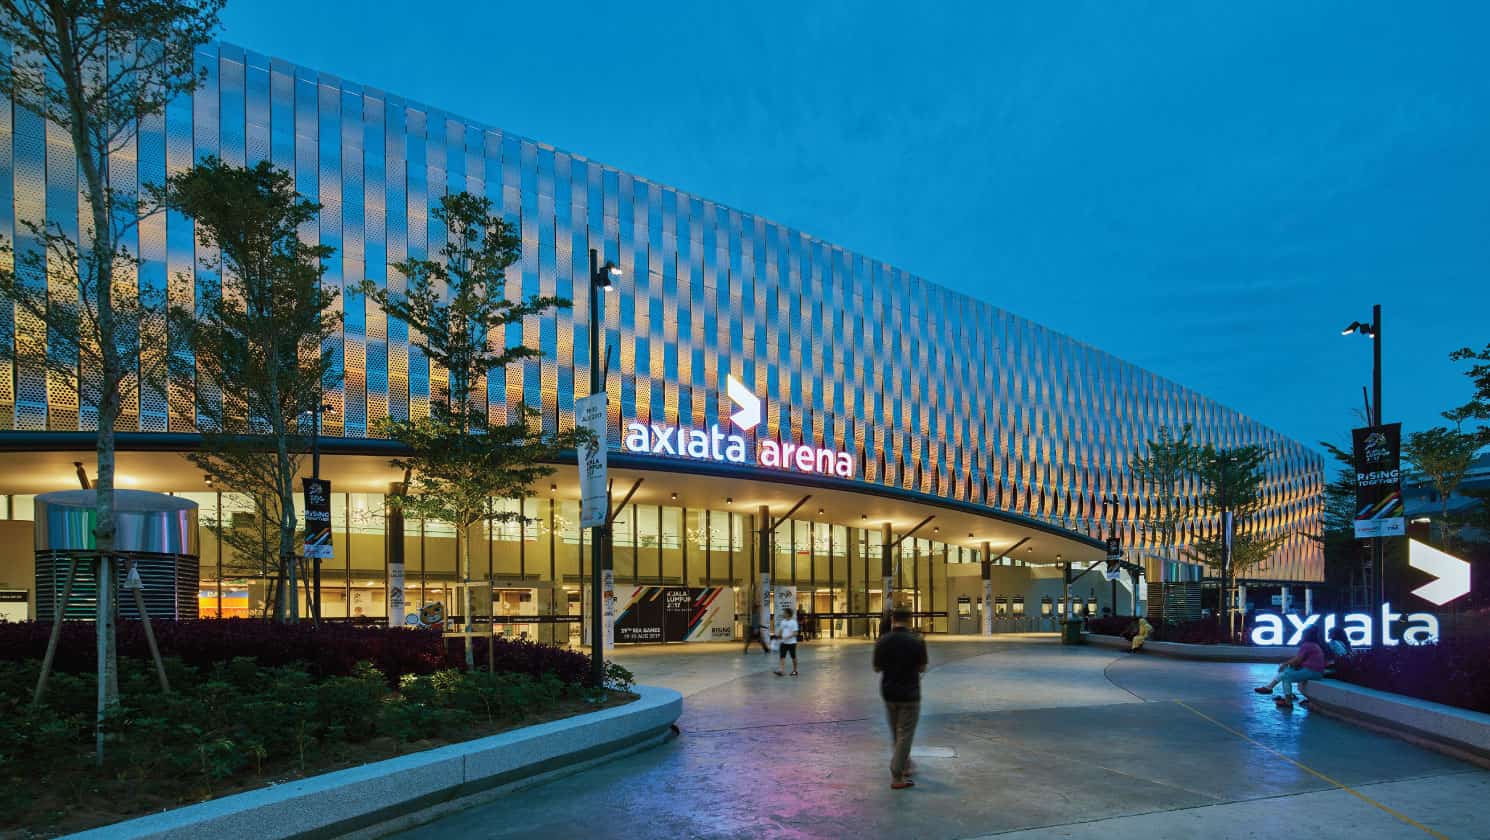 The exterior and the entrance of Axiata Arena in Kuala Lumpur at dusk